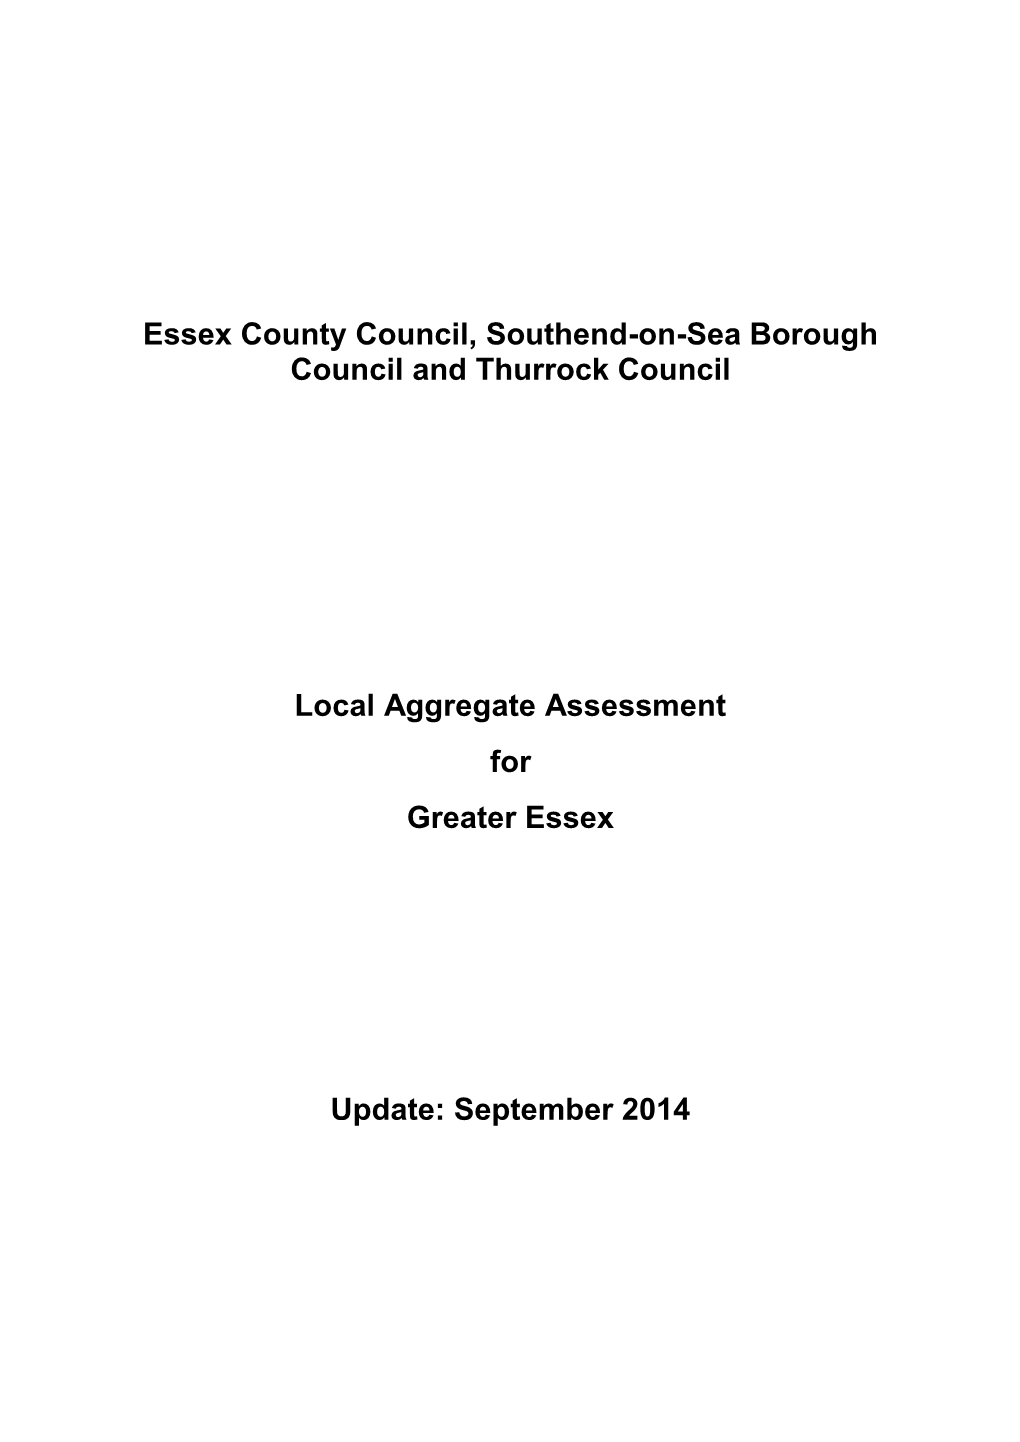 Essex County Council, Southend-On-Sea Borough Council and Thurrock Council